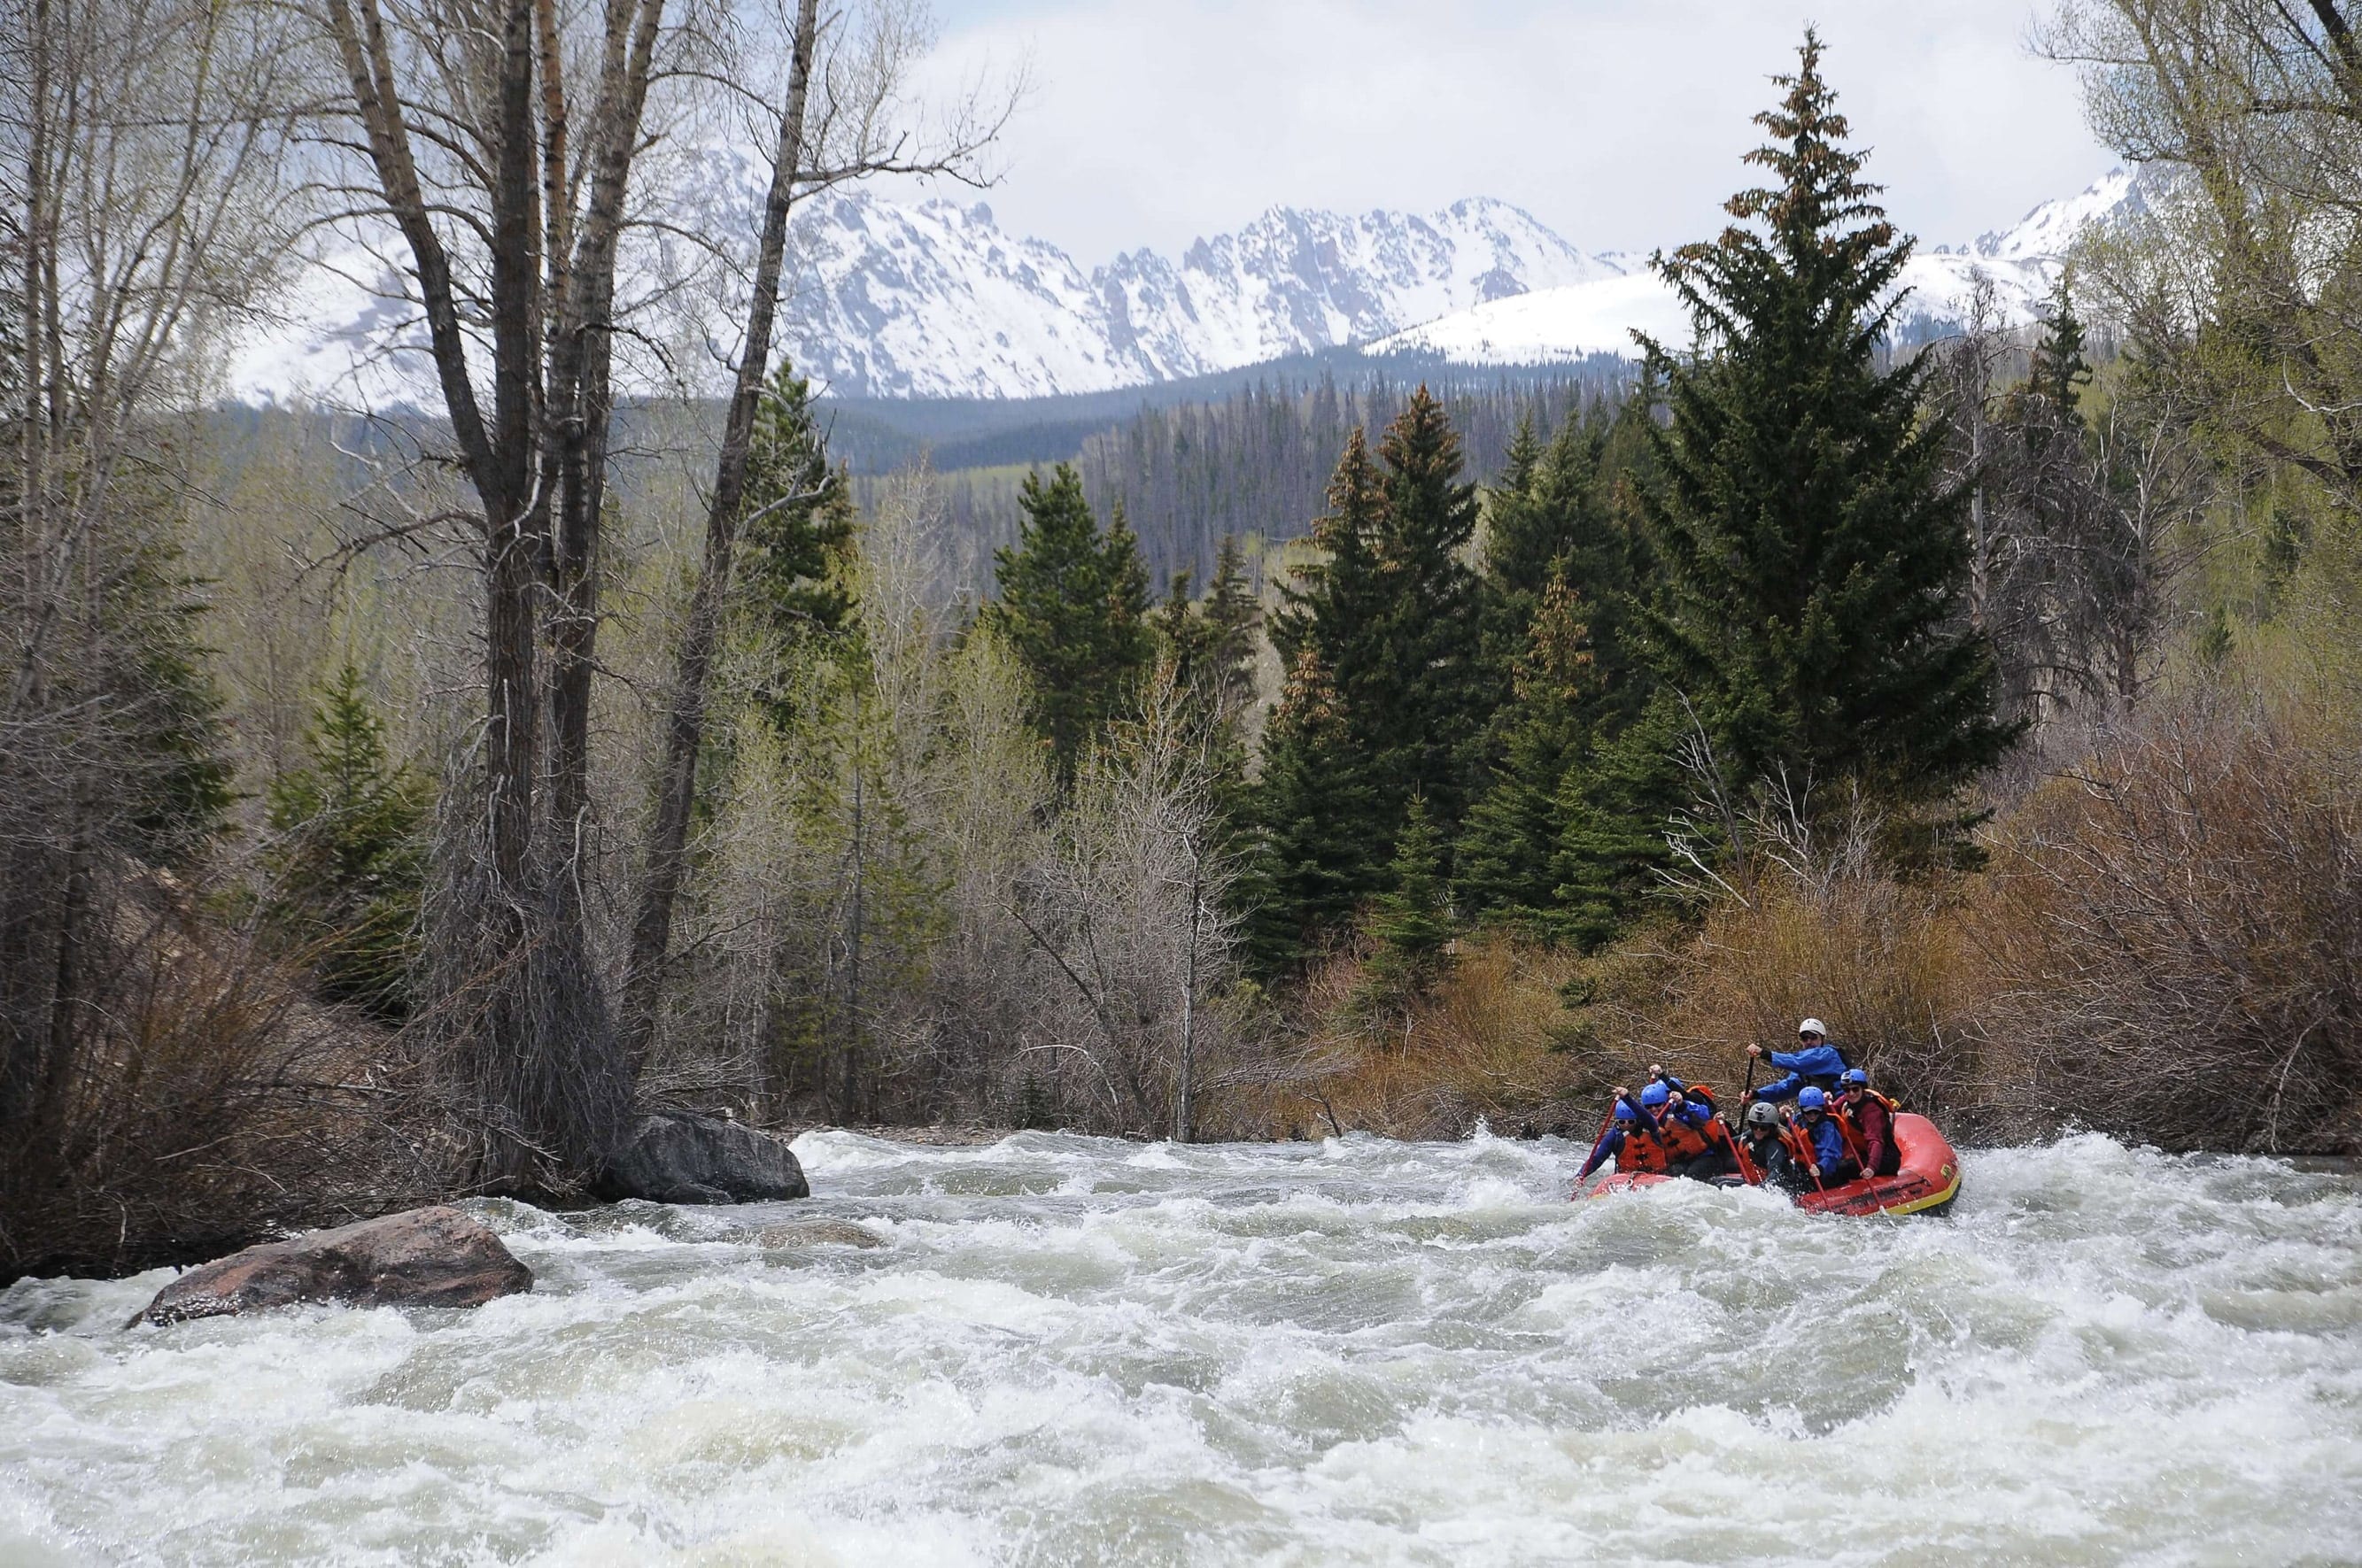 Whitewater rafting group in the Breckenridge rapids